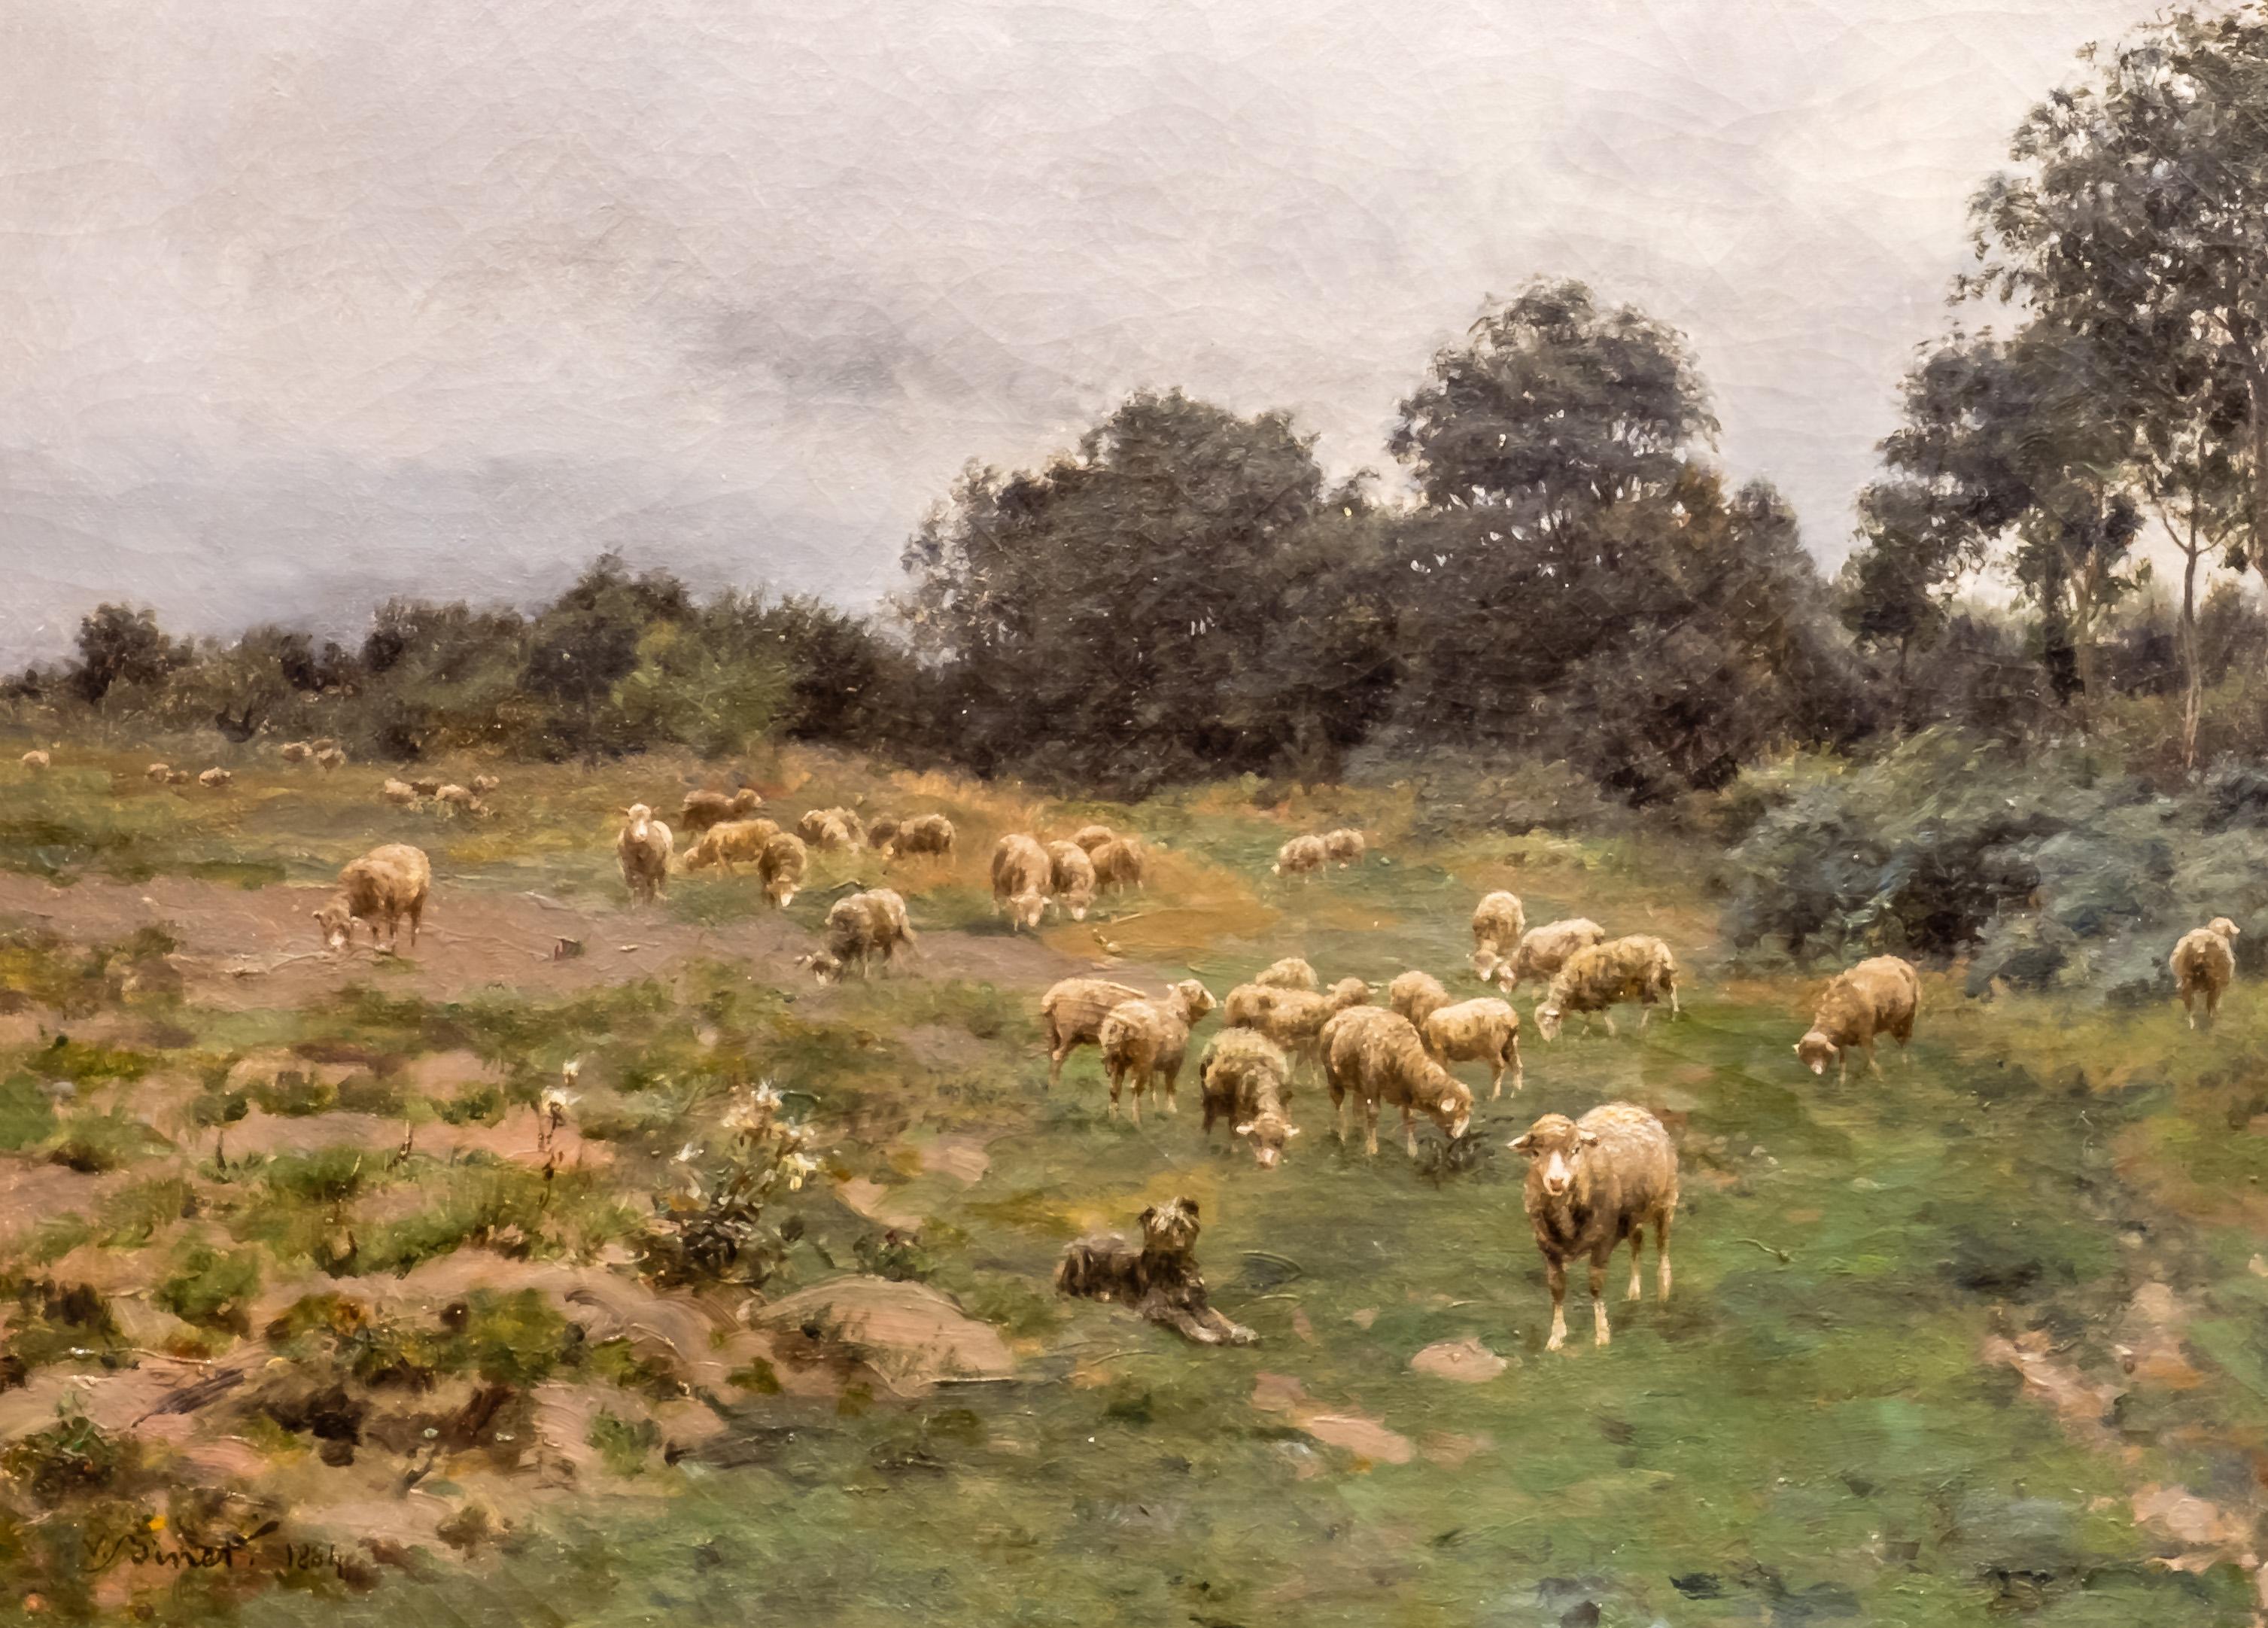 A late 19th century Barbizon School oil on canvas by Victor Jean Baptiste Barthélemy Binet (1849-1924), featuring a rural scene of sheep with a shepherd on a cloudy day.

He exhibited at the 1878 Paris Salon, at the Royal Acadmy in London in 1886